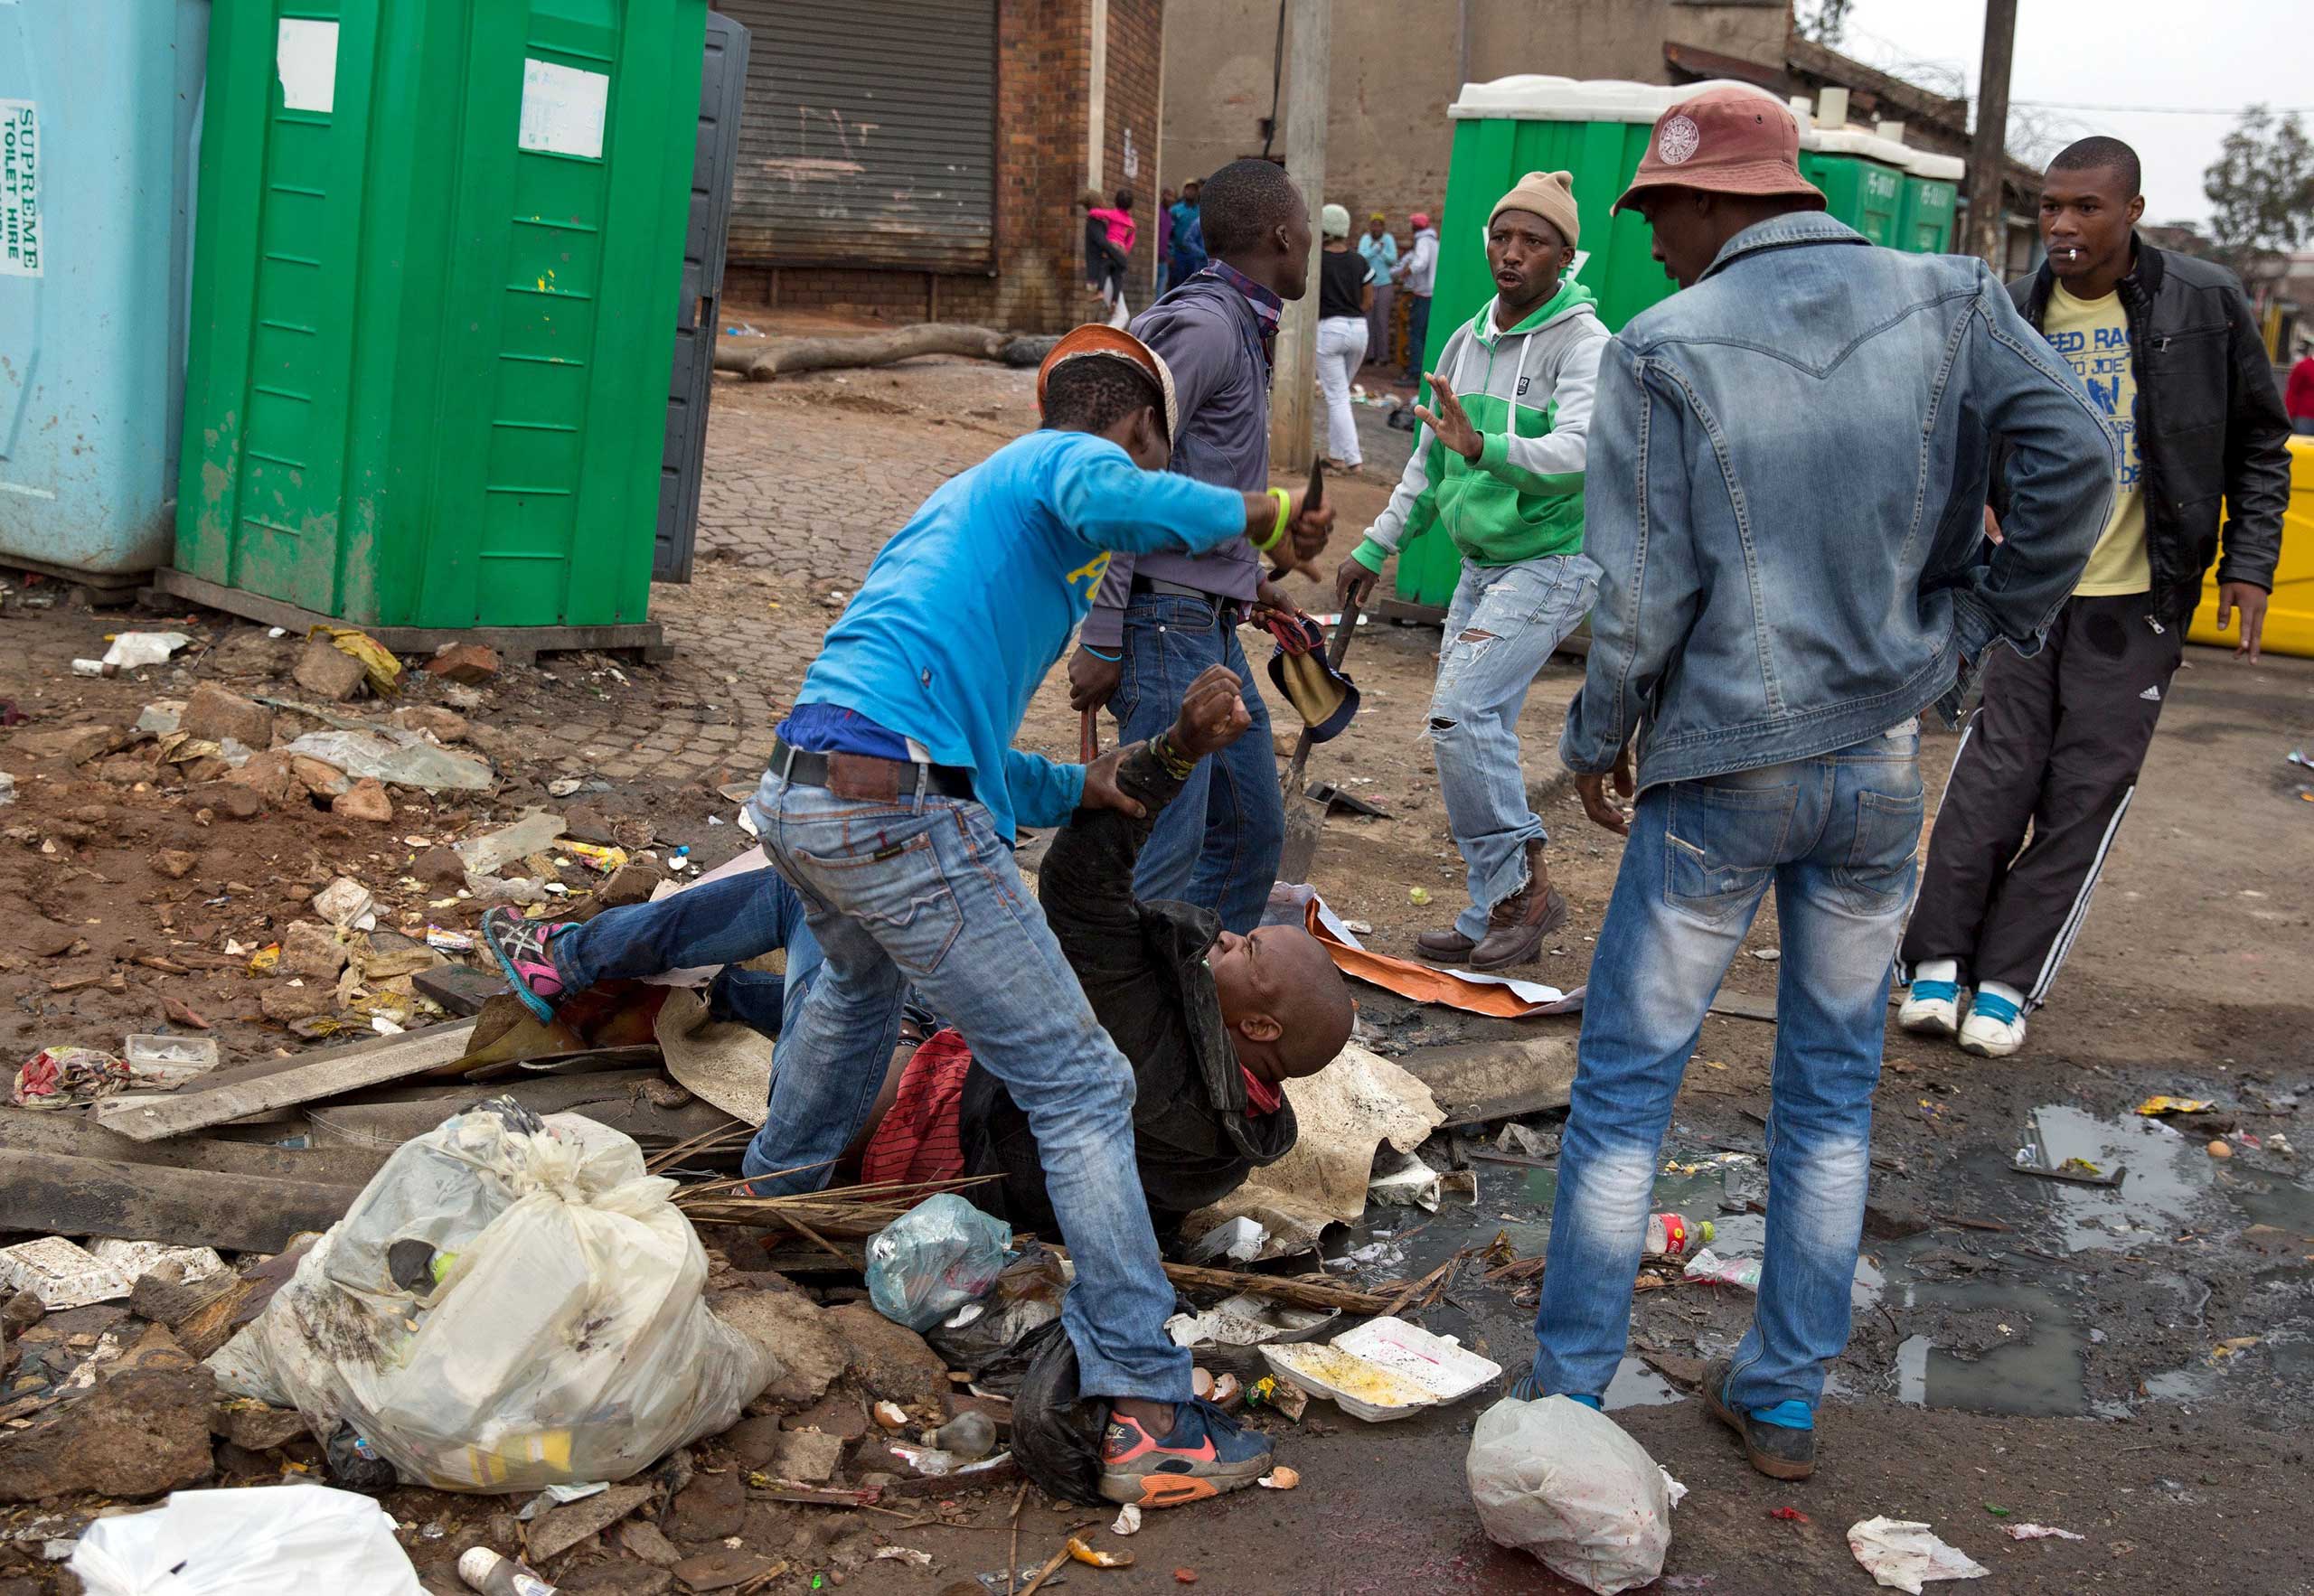 Mozambique national Emmanuel Sithole is attacked by men in Alexandra township during anti-immigrant violence in Johannesburg on April 18, 2015. (James Oatway—Sunday Times/Reuters)